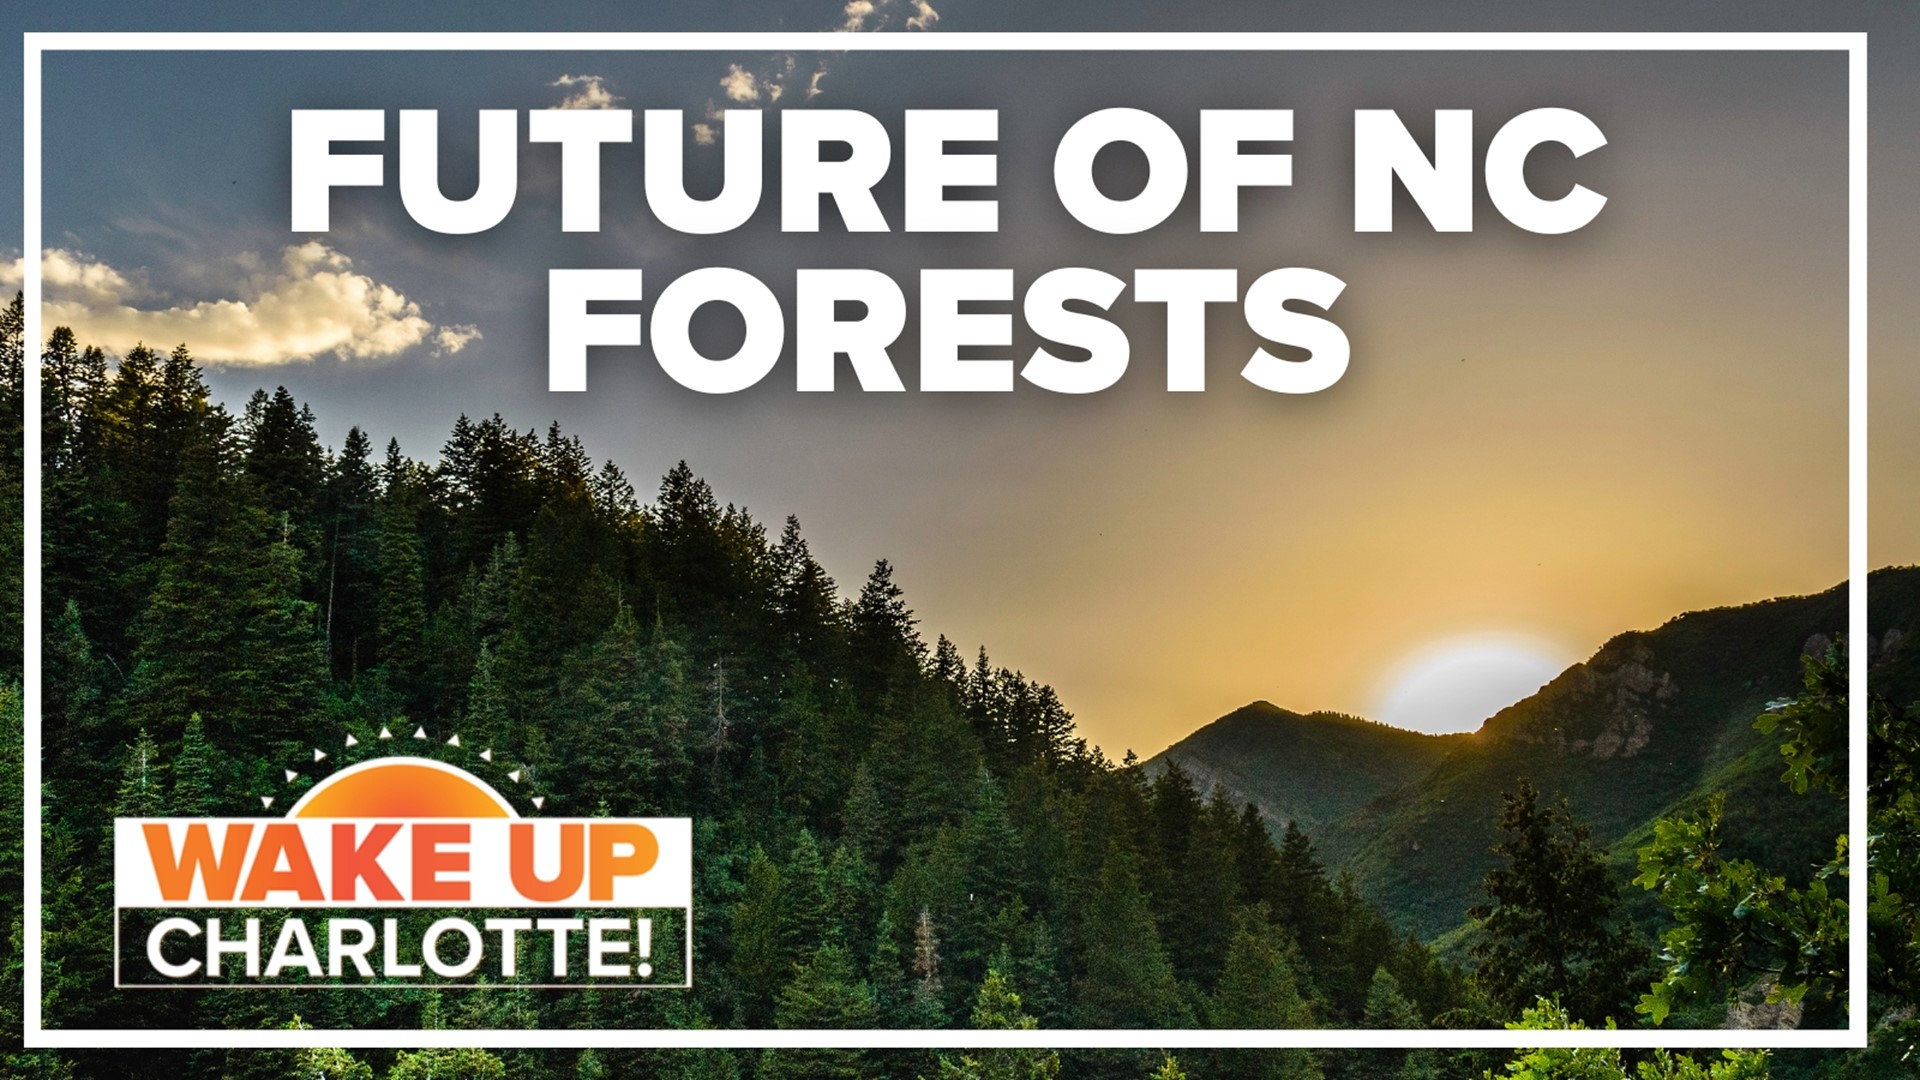 North Carolina's Nantahala and Pisgah national forests are among the most visited in the U.S. Their futures are now in the hands of the U.S. Forest Service.